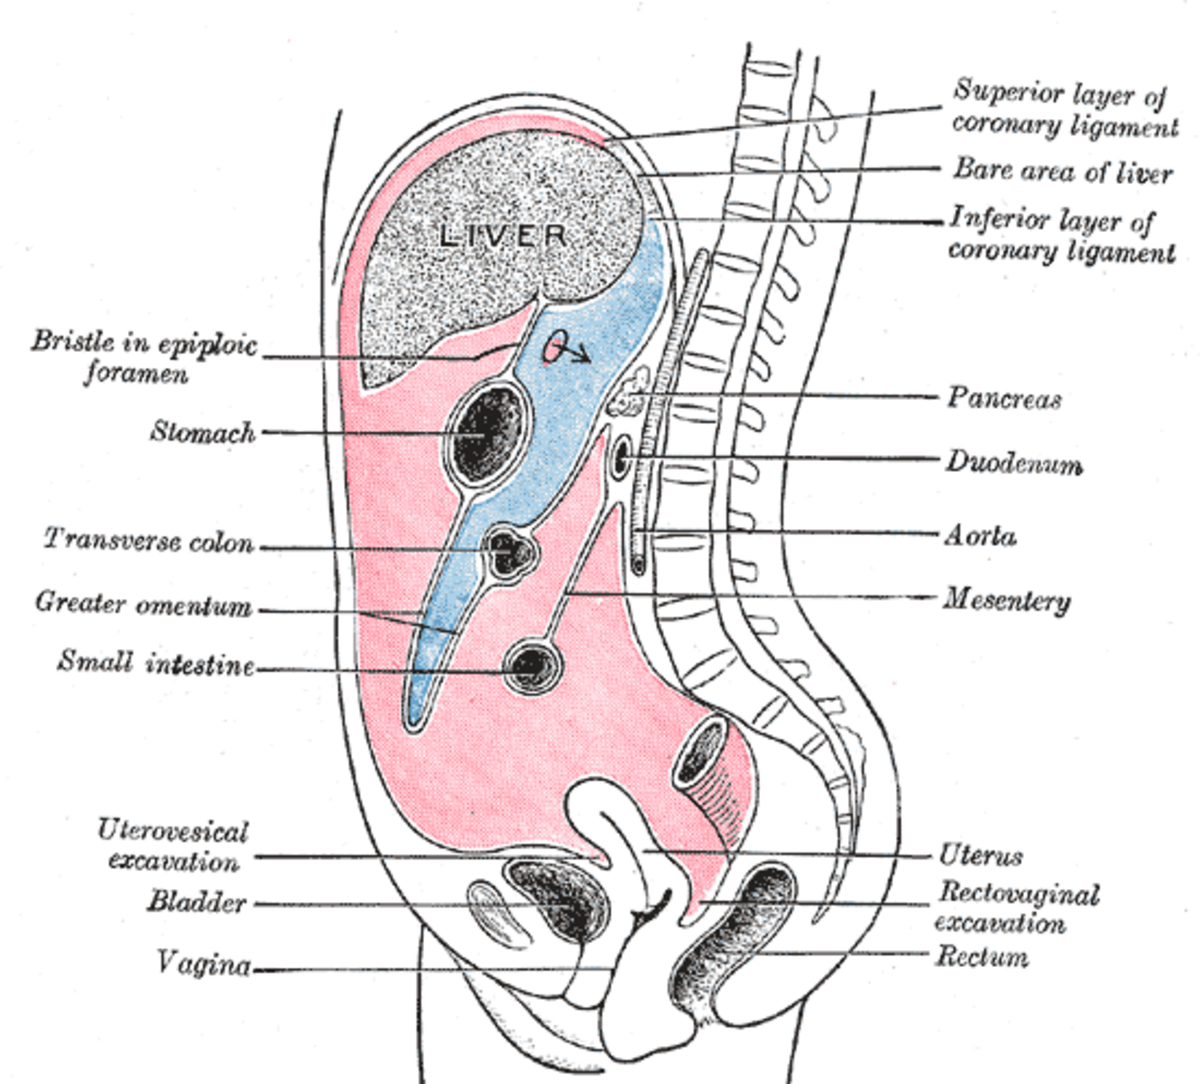 The peritoneum surrounds the entire abdominal cavity, within which water cushions each organ (red and blue).